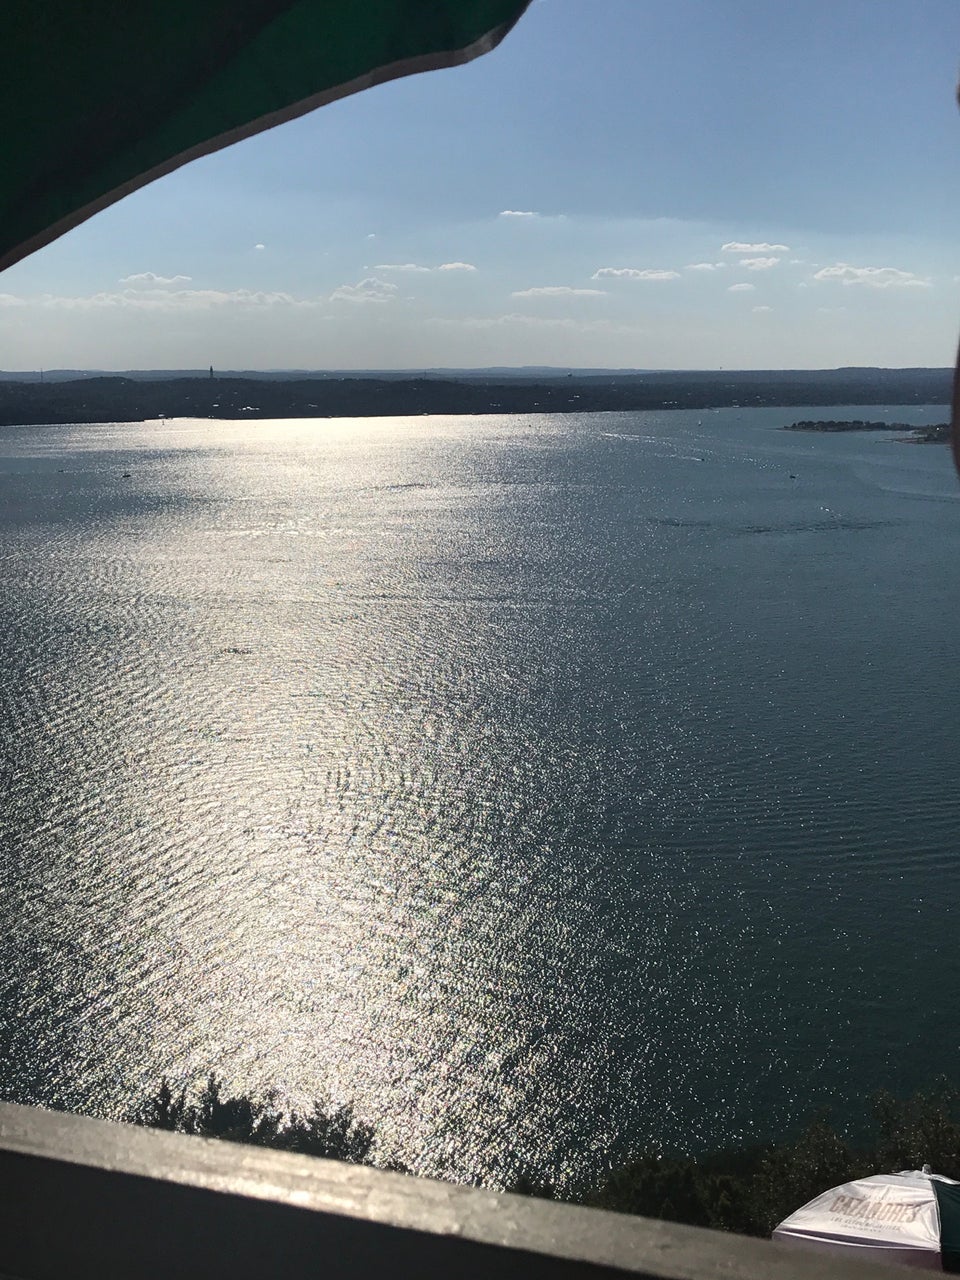 Photo of The Oasis On Lake Travis